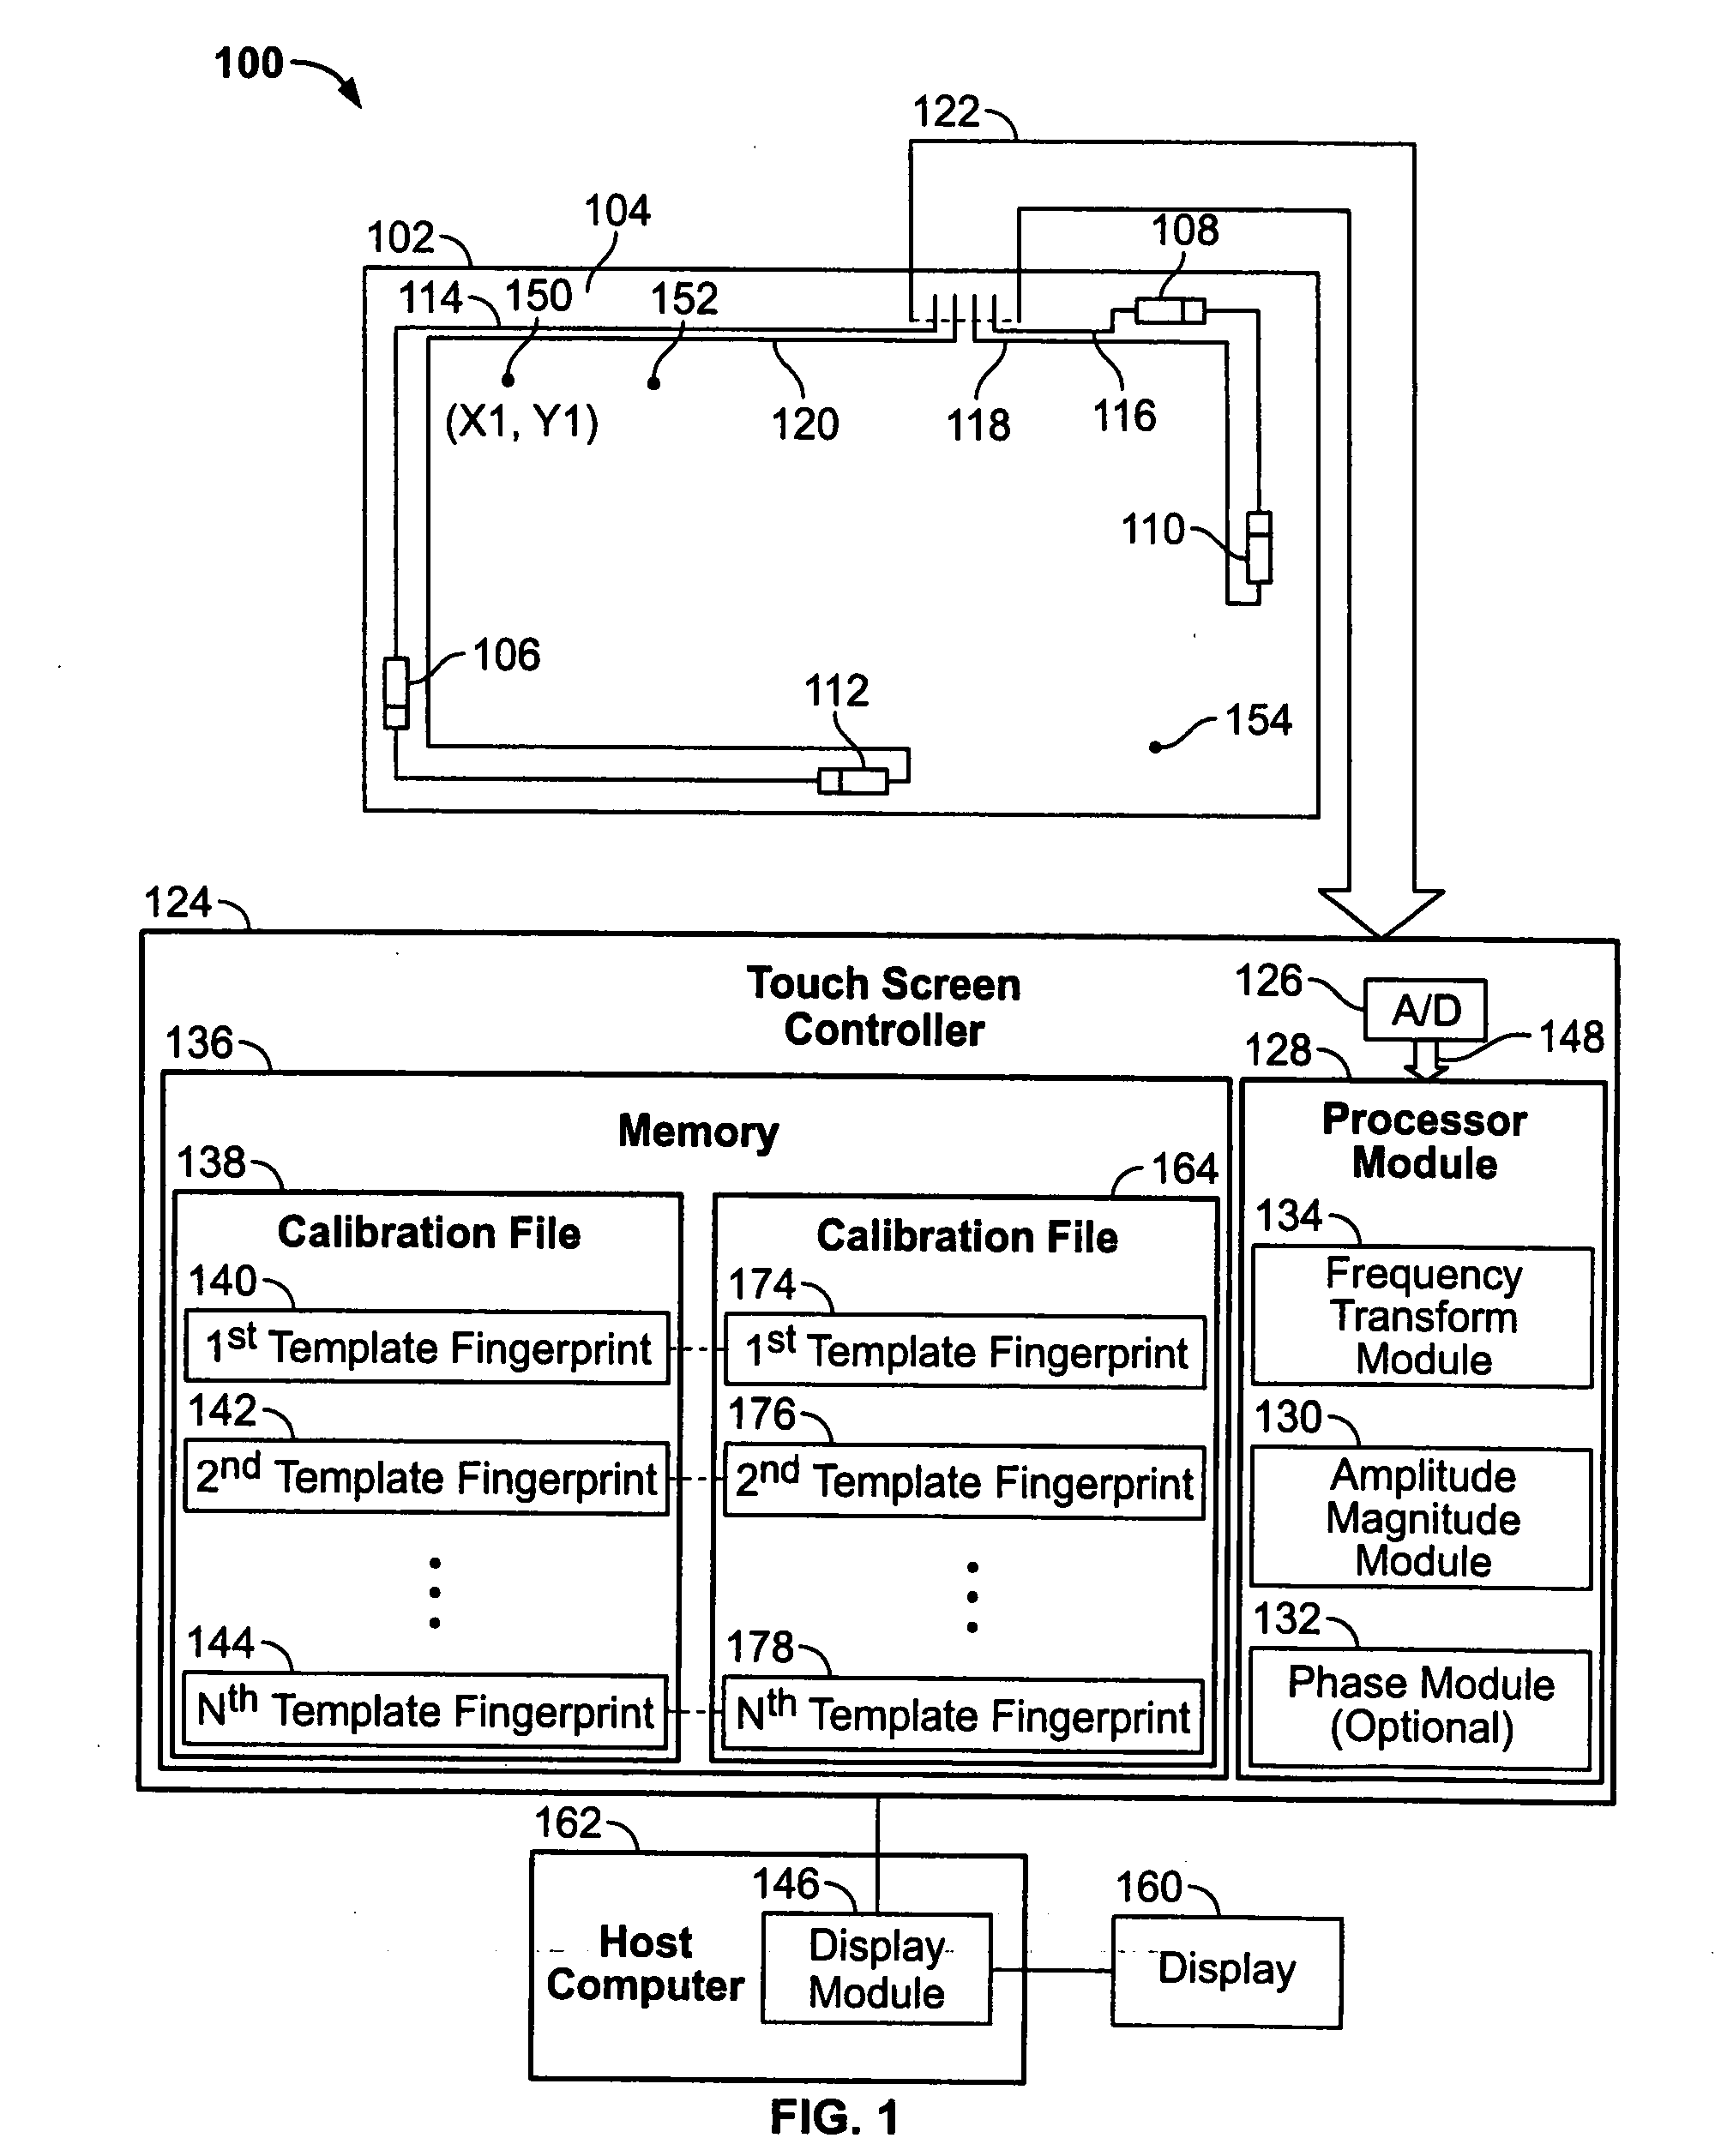 Method and system for detecting touch events based on magnitude ratios